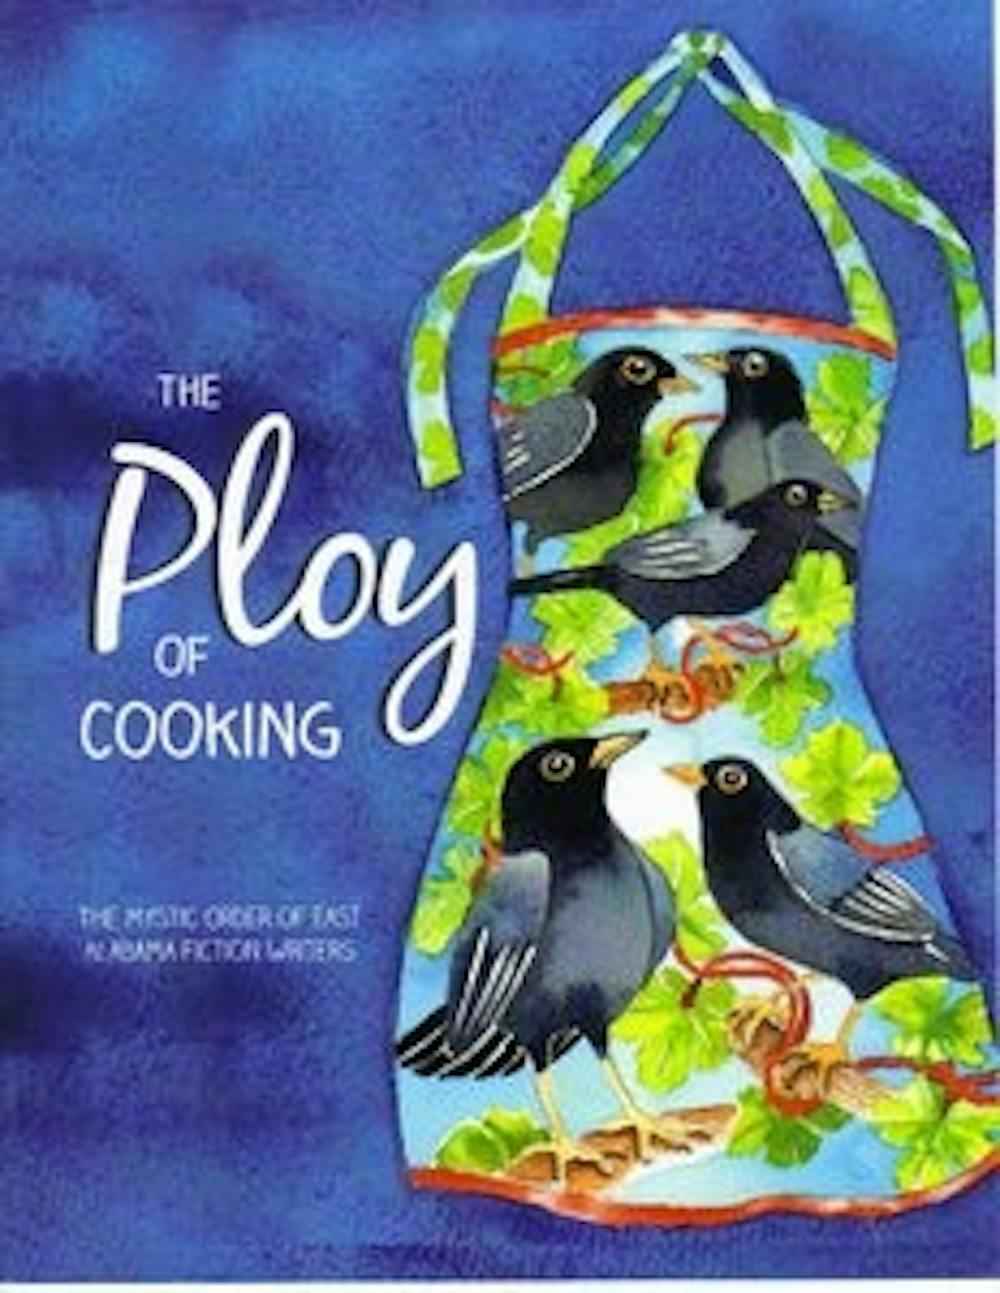 "The Ploy of Cooking" is the second book published by The Mystic Order of East Alabama Fiction Writers and involves humorous stories involving food. (Courtesy of The Mystic Order of East Alabama Fiction Writers)